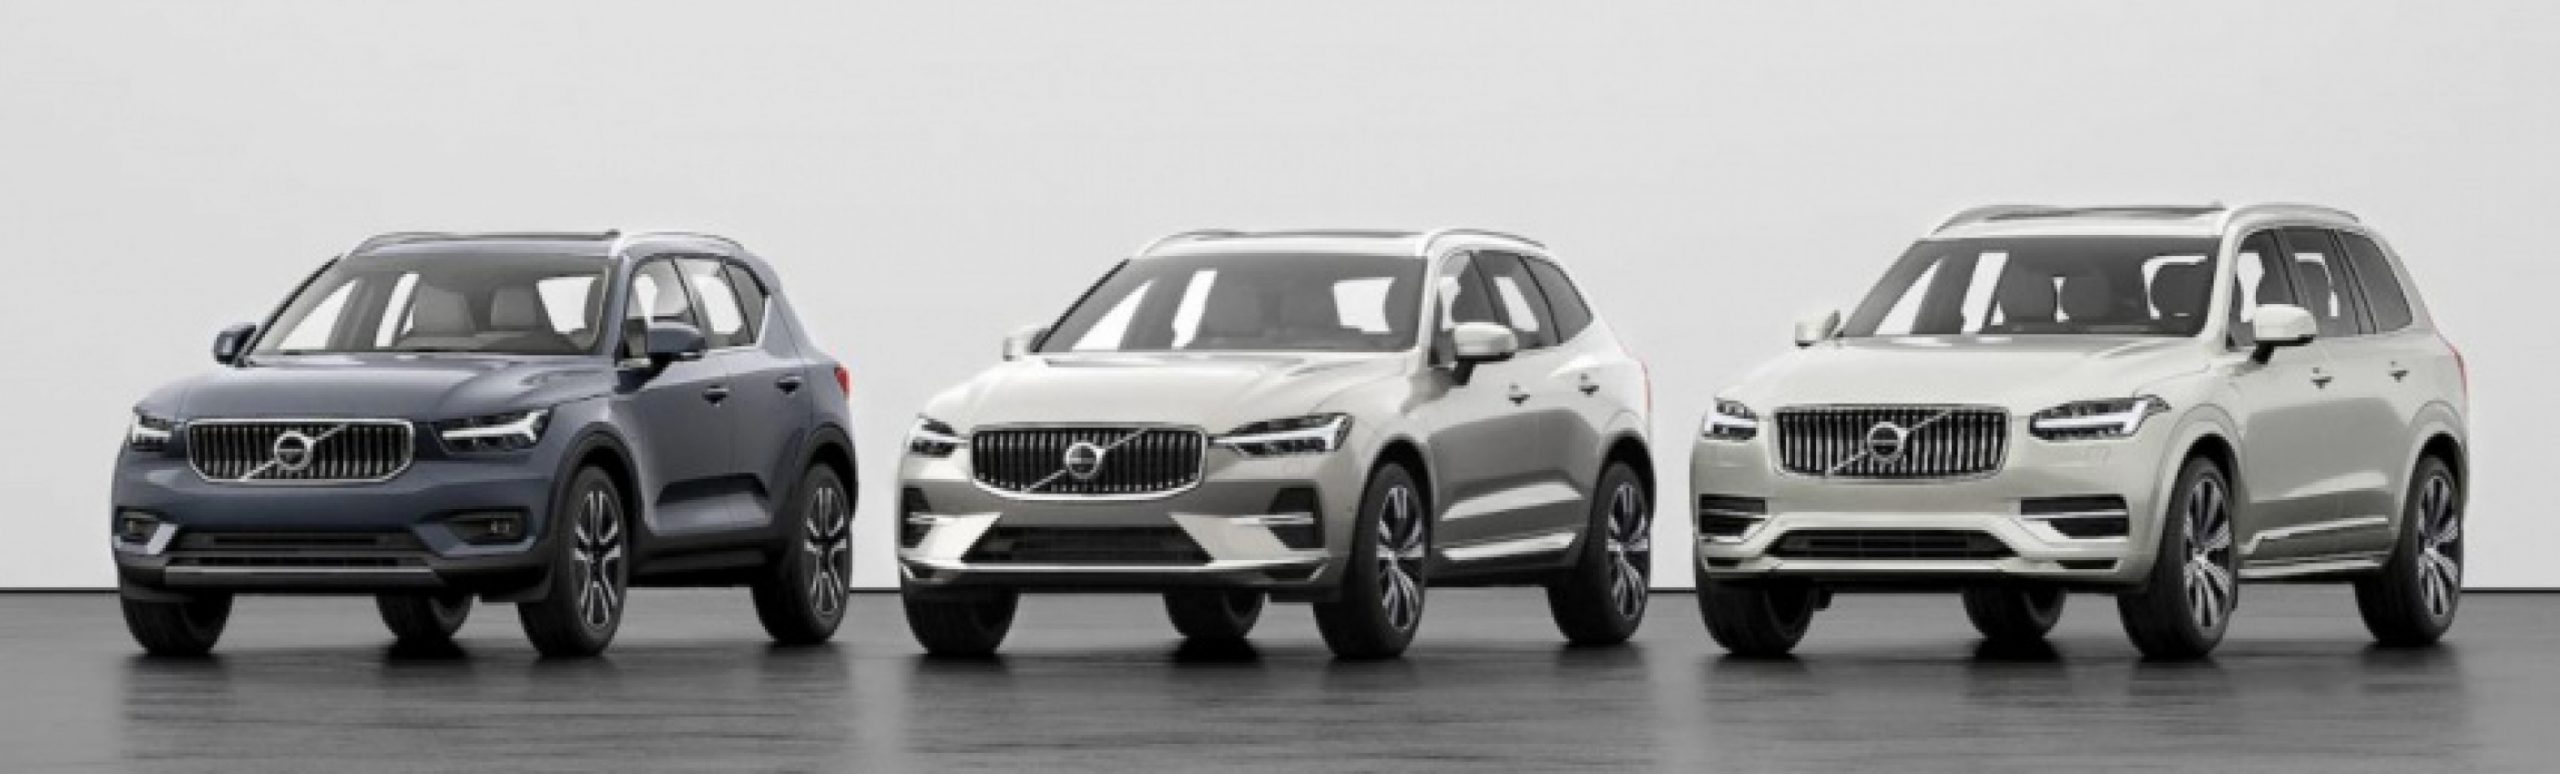 autos, cars, volvo, roll stability control, volvo rsc, volvo xc90, looking back: the volvo that was late into the market… but became sweden’s most valuable export product